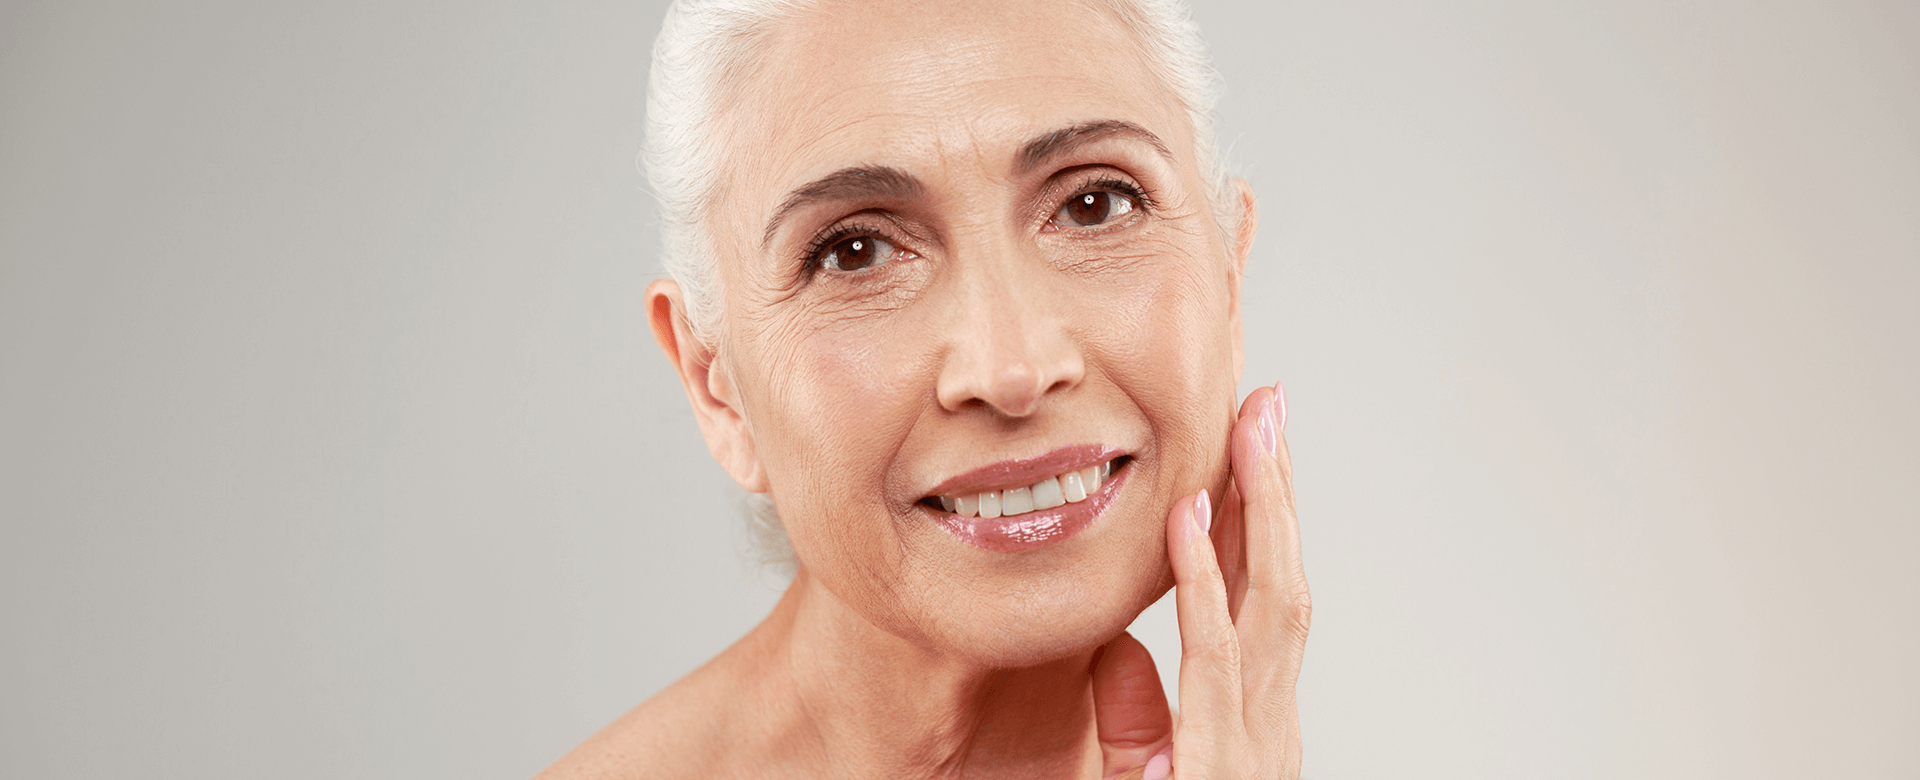 Older Woman Smiling - Exactly How Injectable HGH Works as an Anti-Aging Medicine